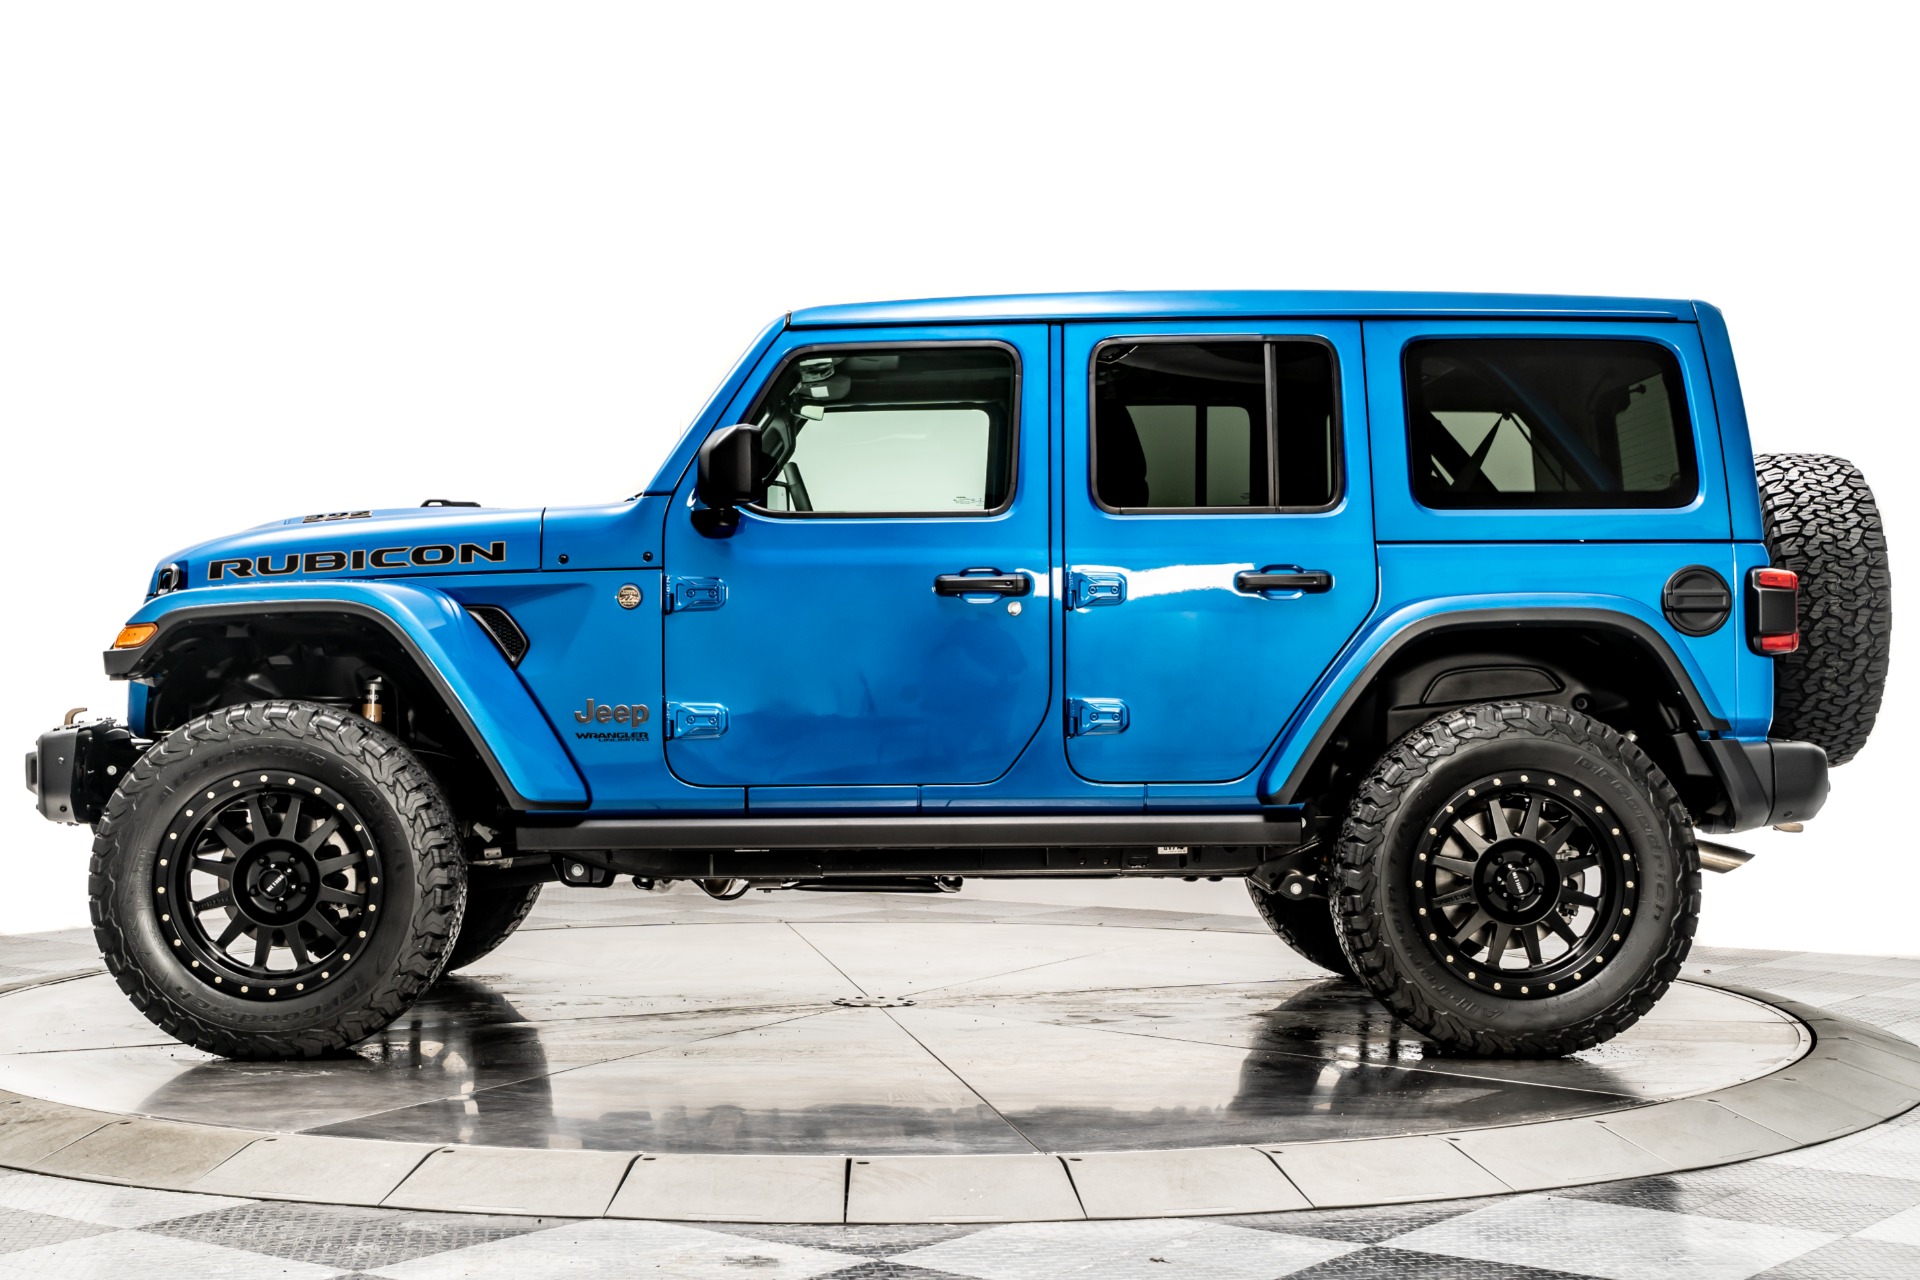 Used 2021 Jeep Wrangler Unlimited Rubicon 392 For Sale (Sold) | Marshall  Goldman Beverly Hills Stock #WJW392BL2